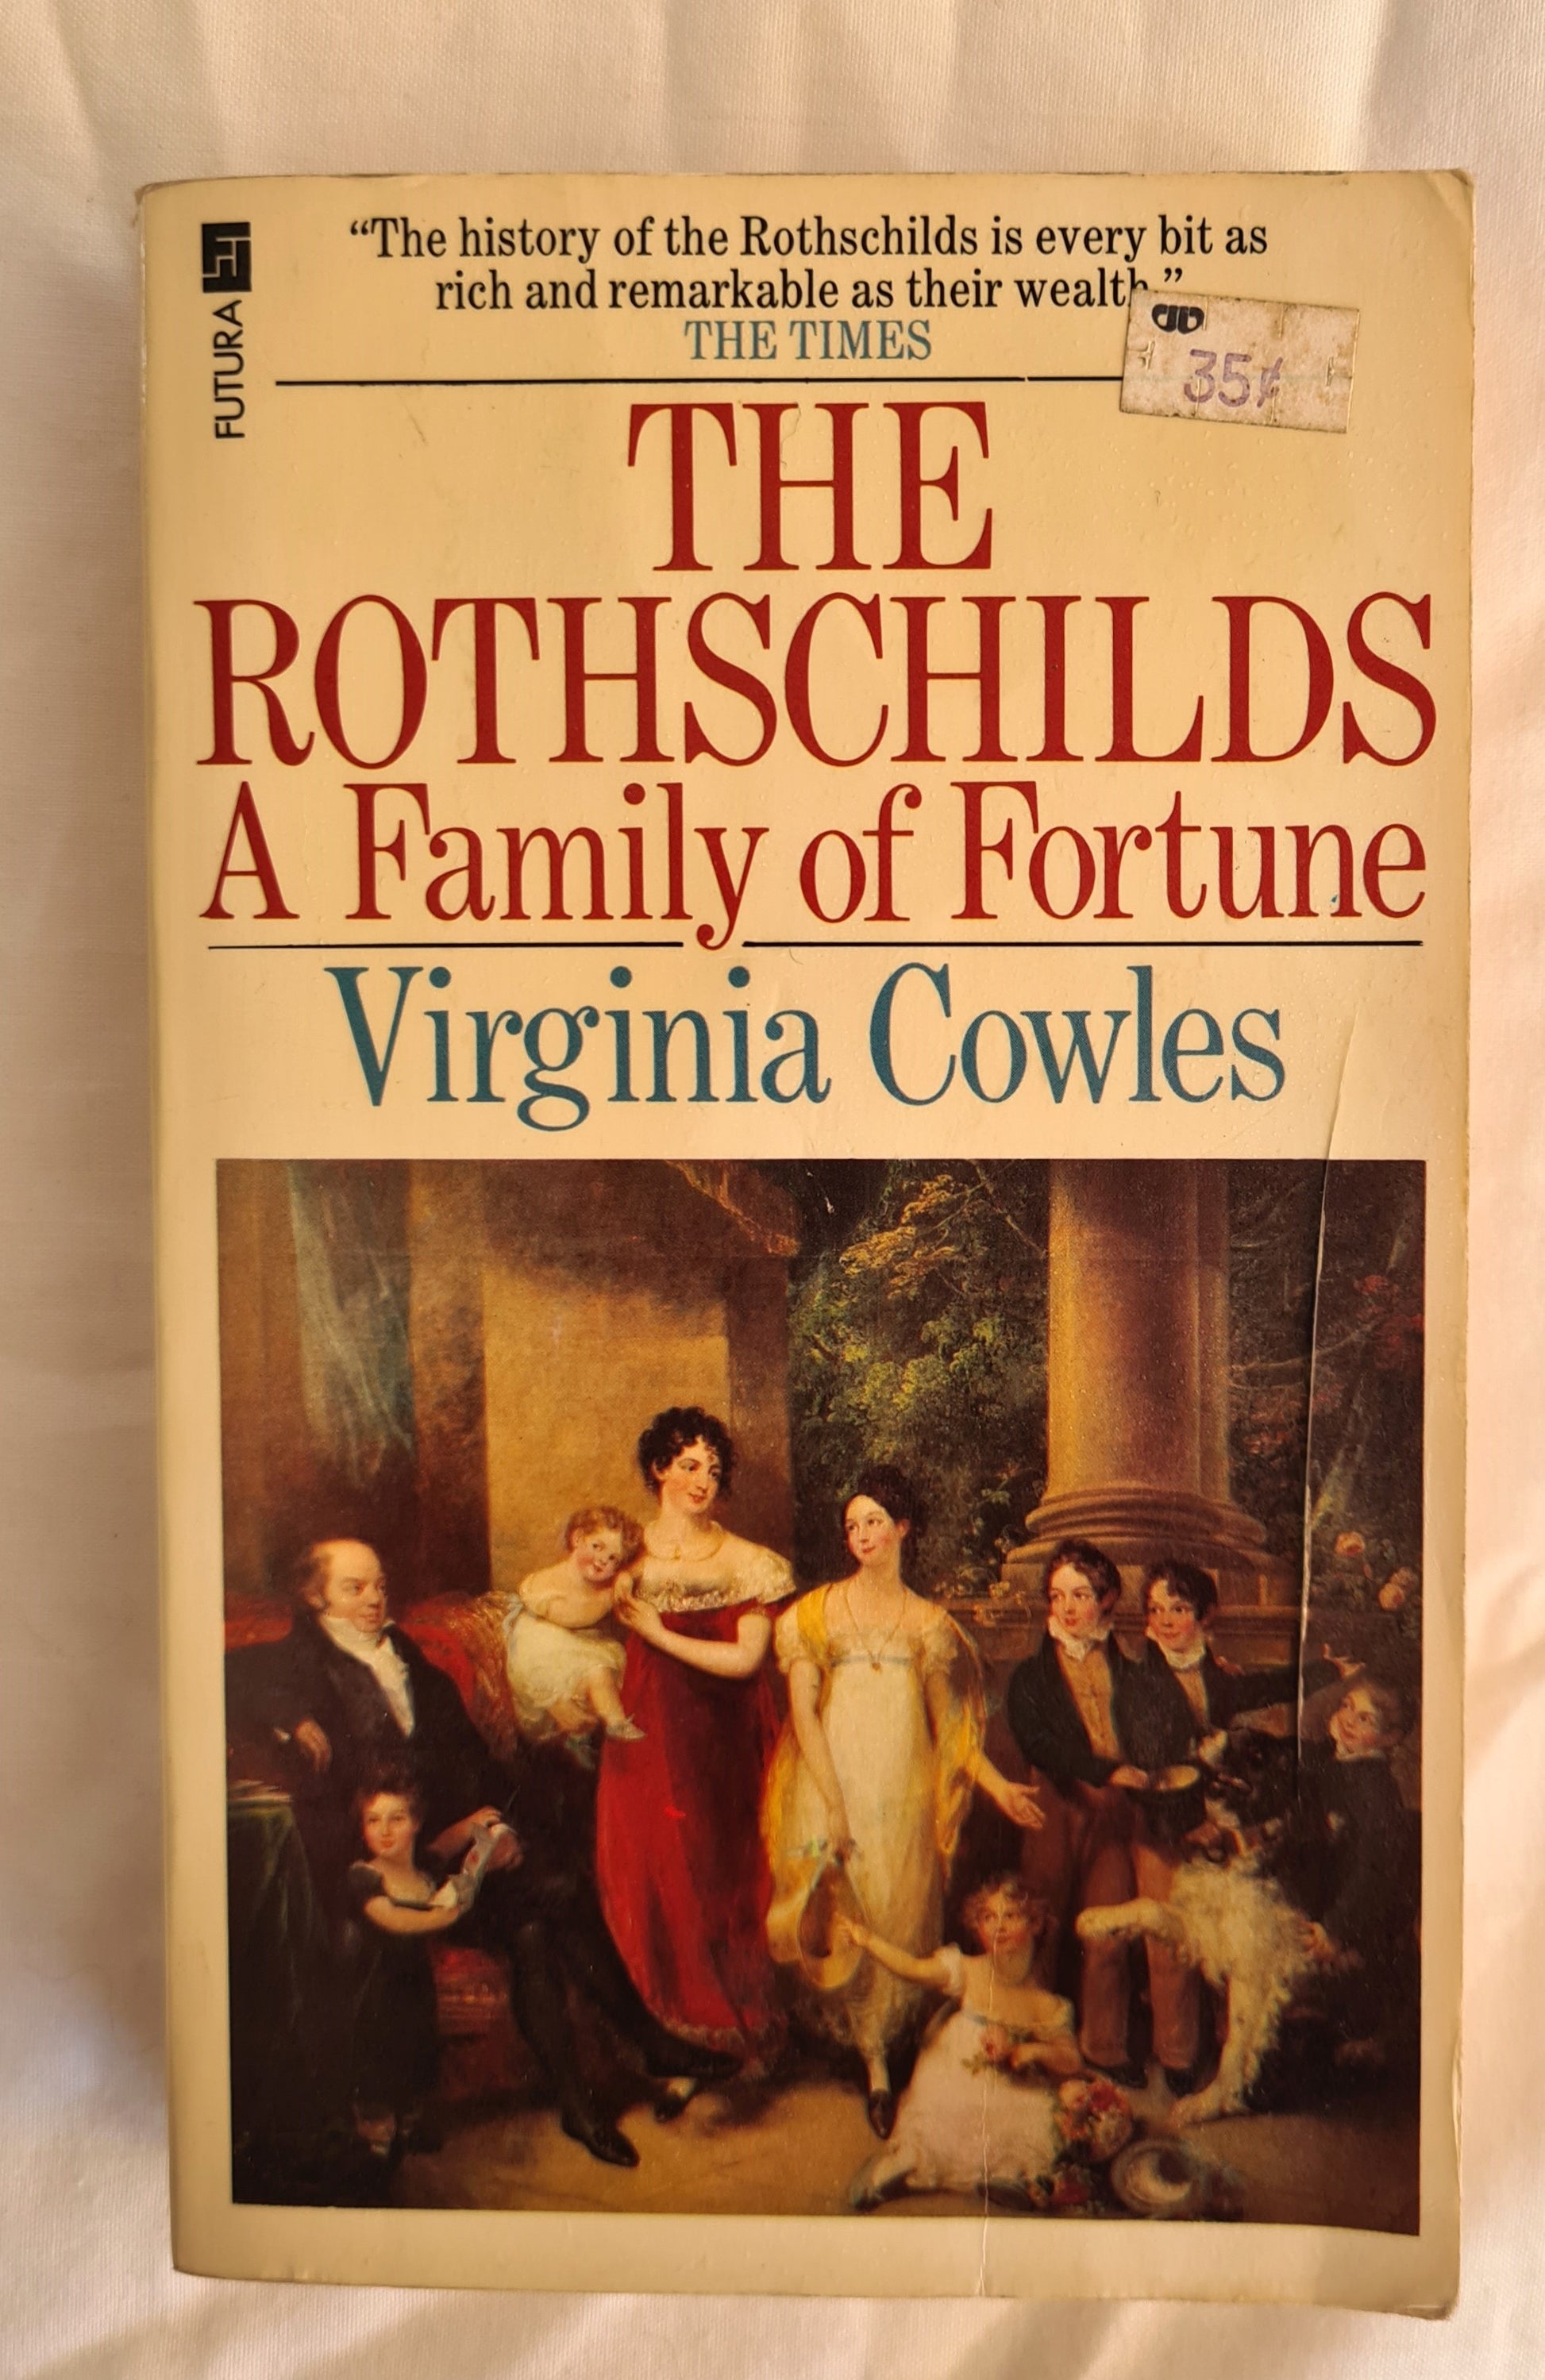 The Rothschilds  A Family of Fortune  by Virginia Cowles